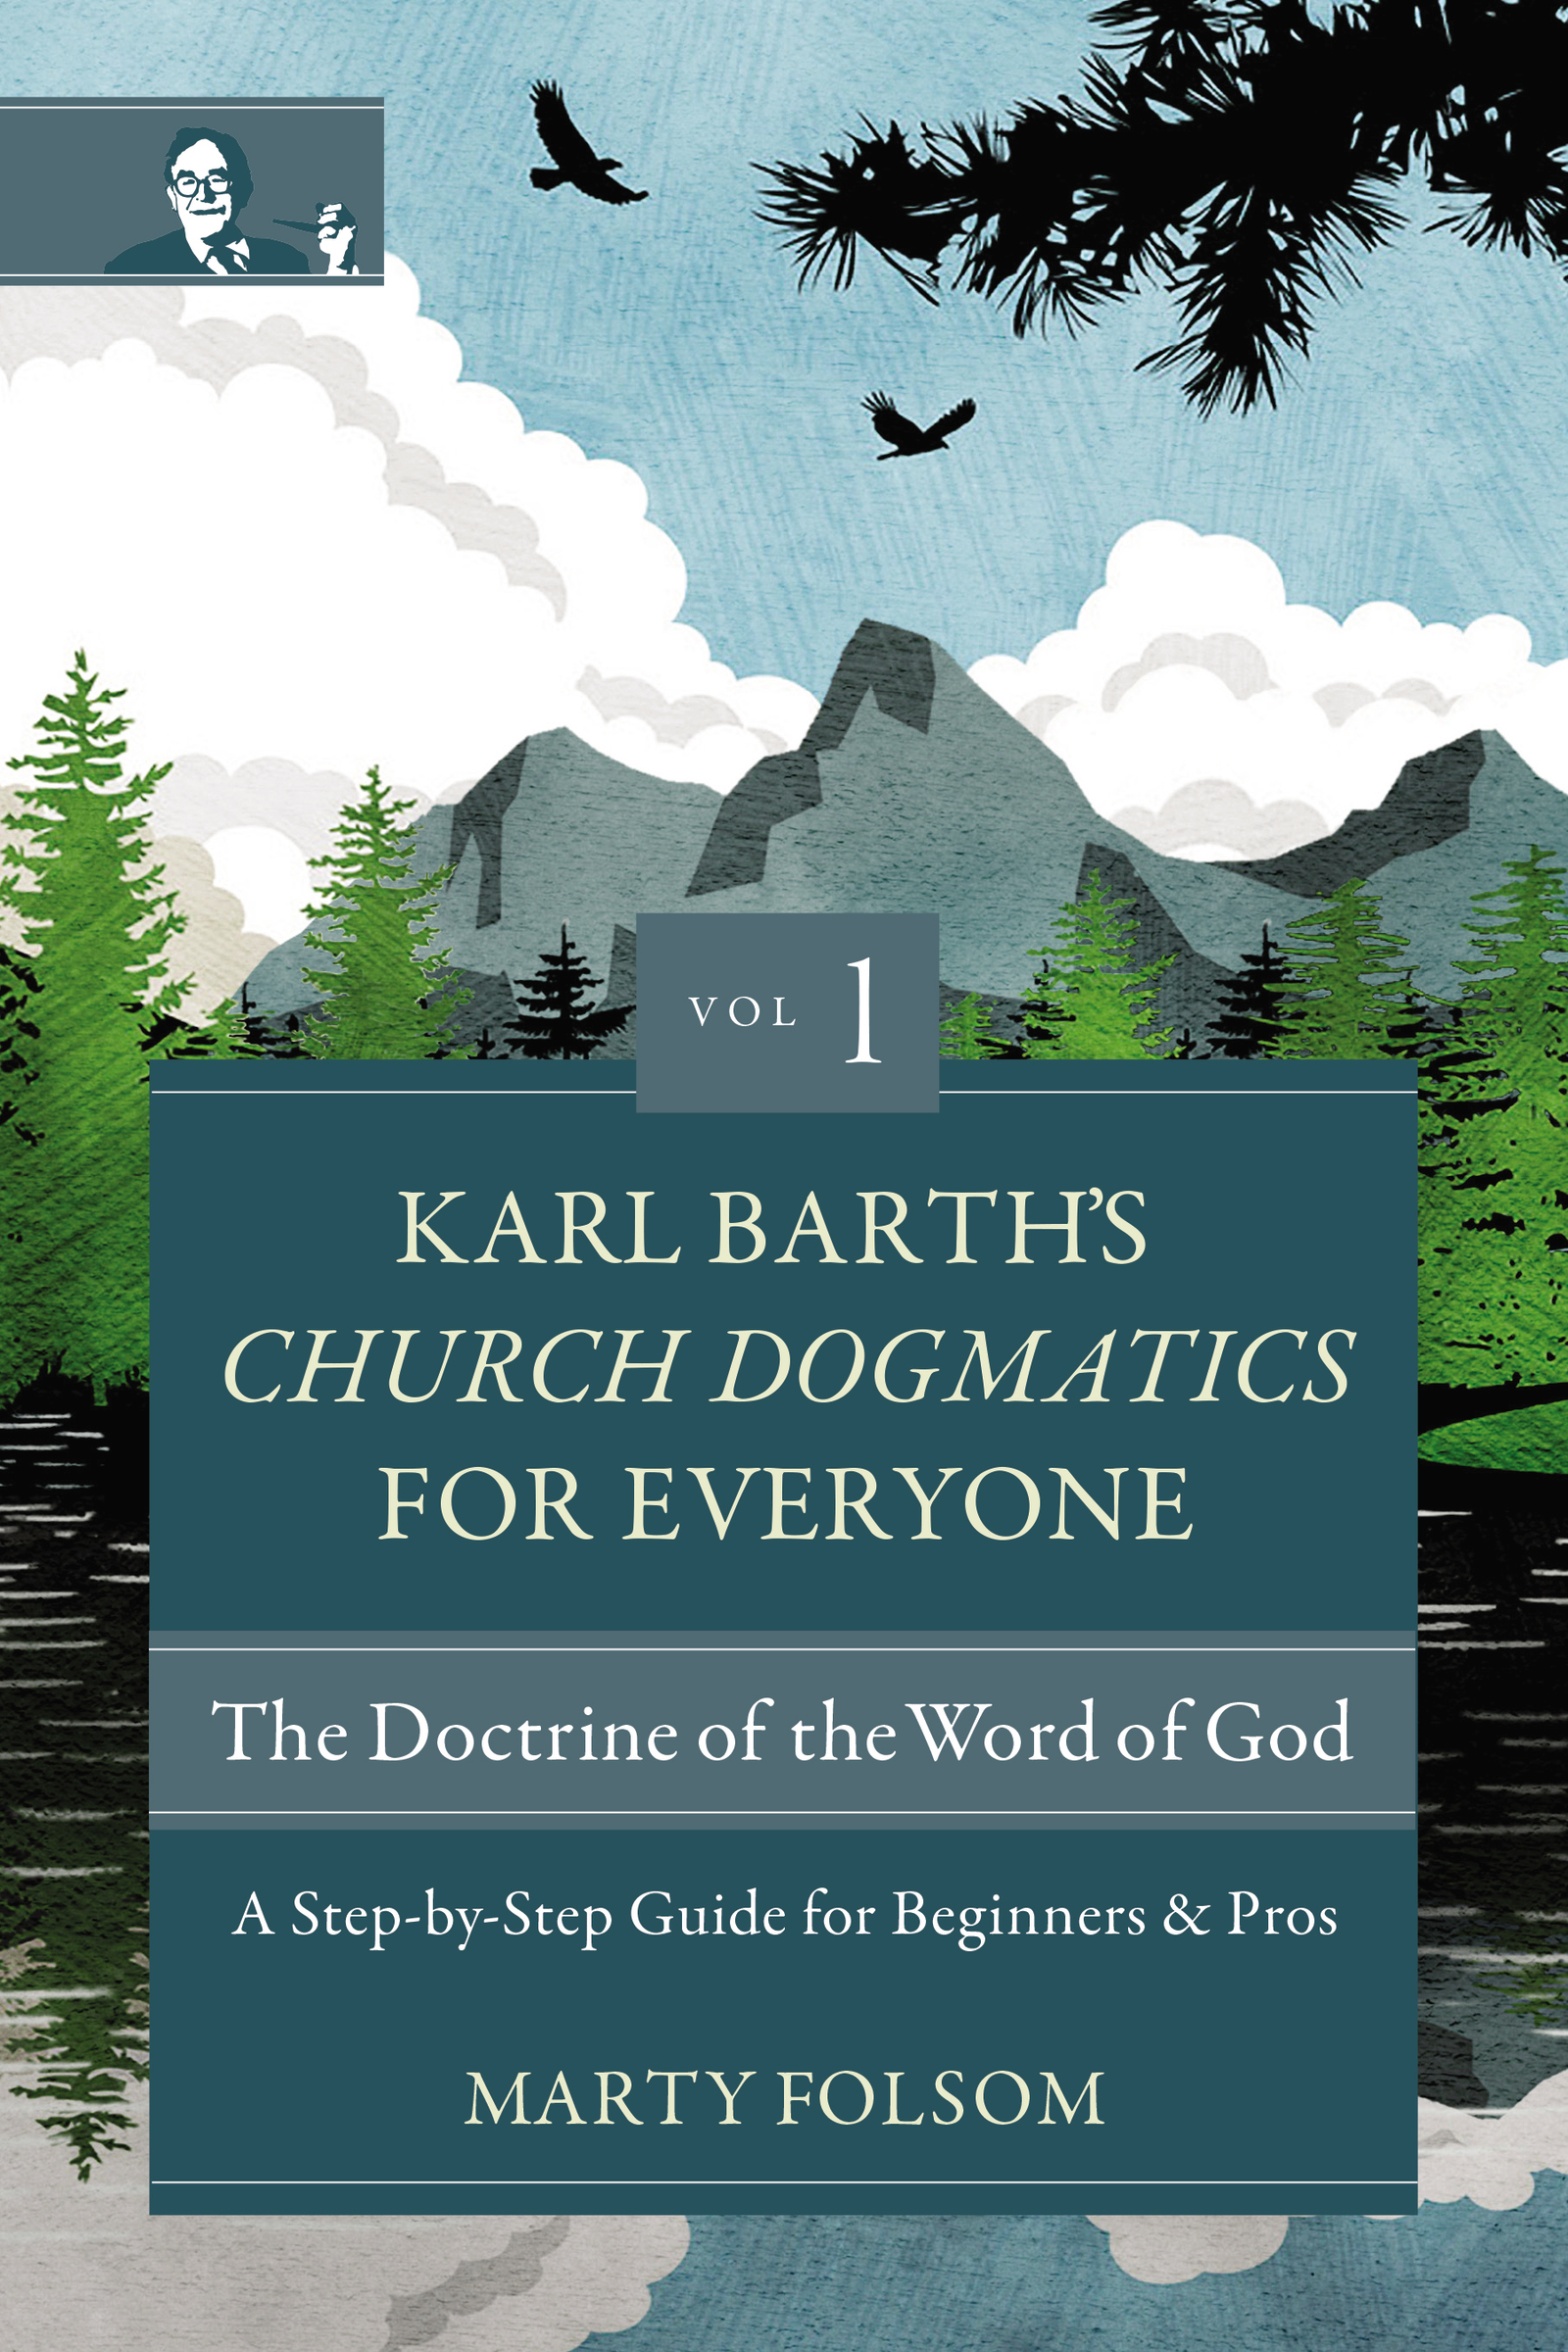 Karl Barth's Church Dogmatics for Everyone, Volume 1---The Doctrine of the Word of God